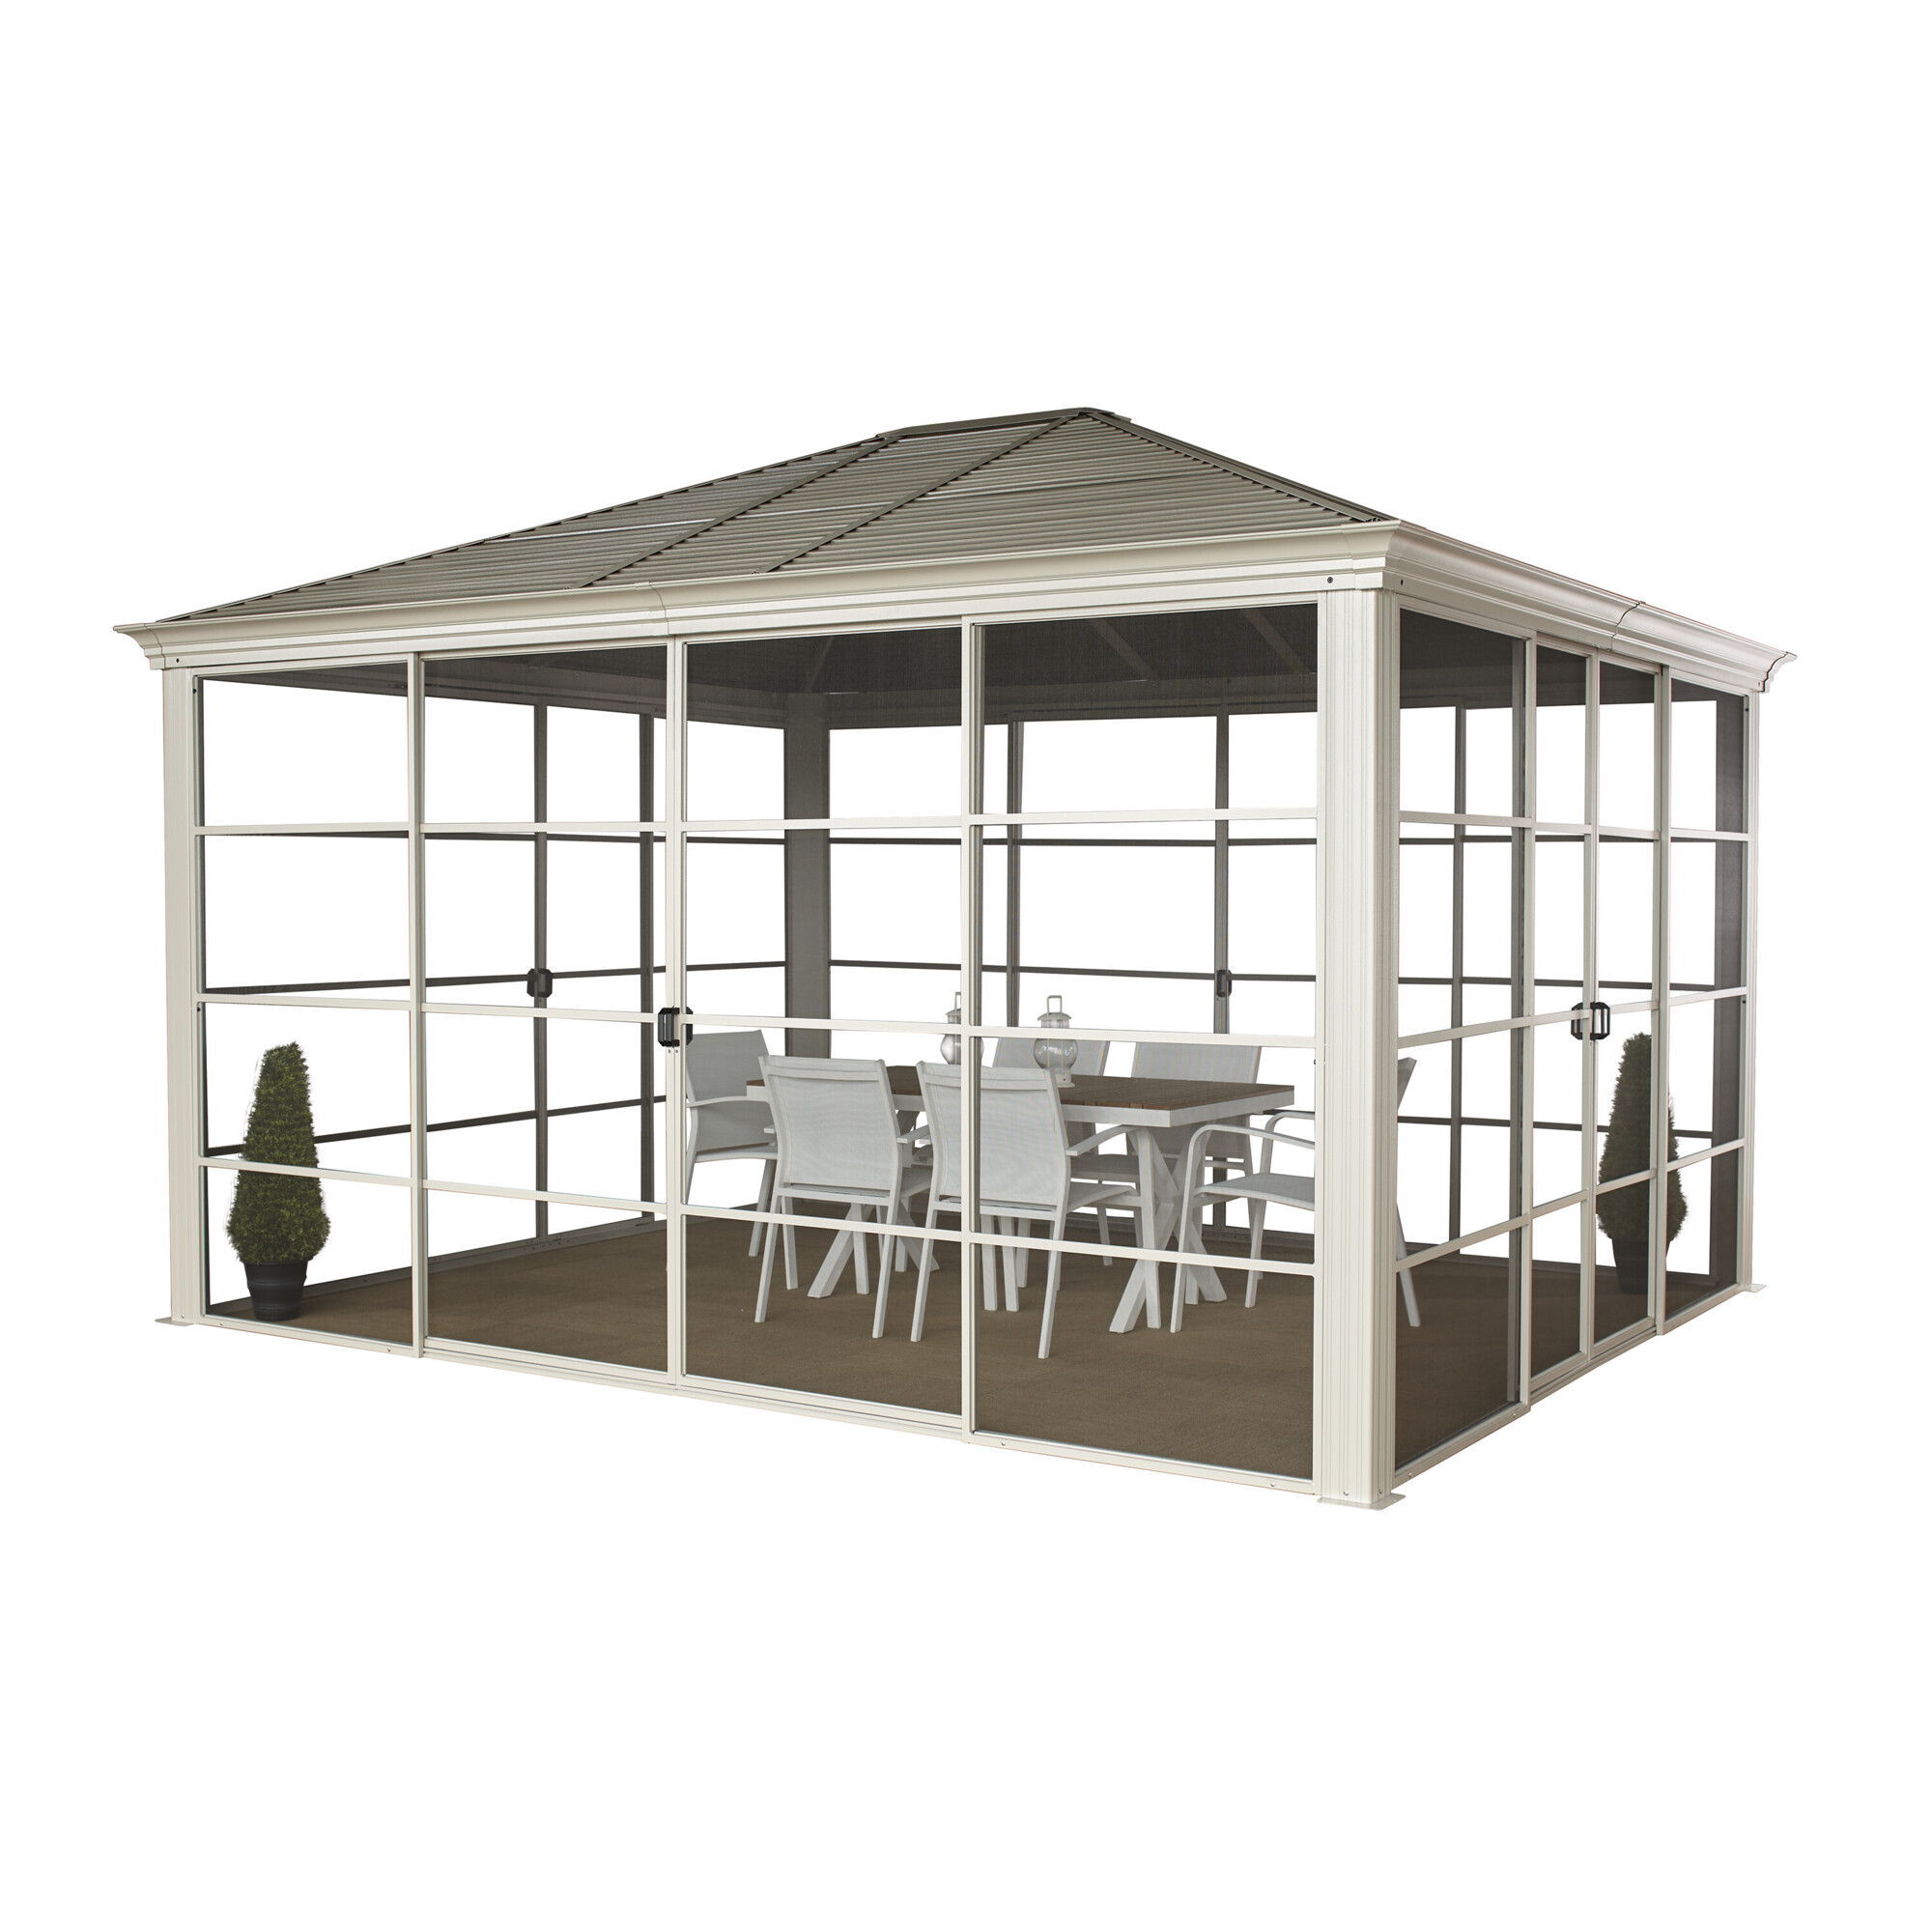 ShelterLogic STRIANO, Sojag Striano 12ft. x 14ft. Screen House, Color Other, Shape Rectangle, Frame Material Aluminum, Model 500-9164367